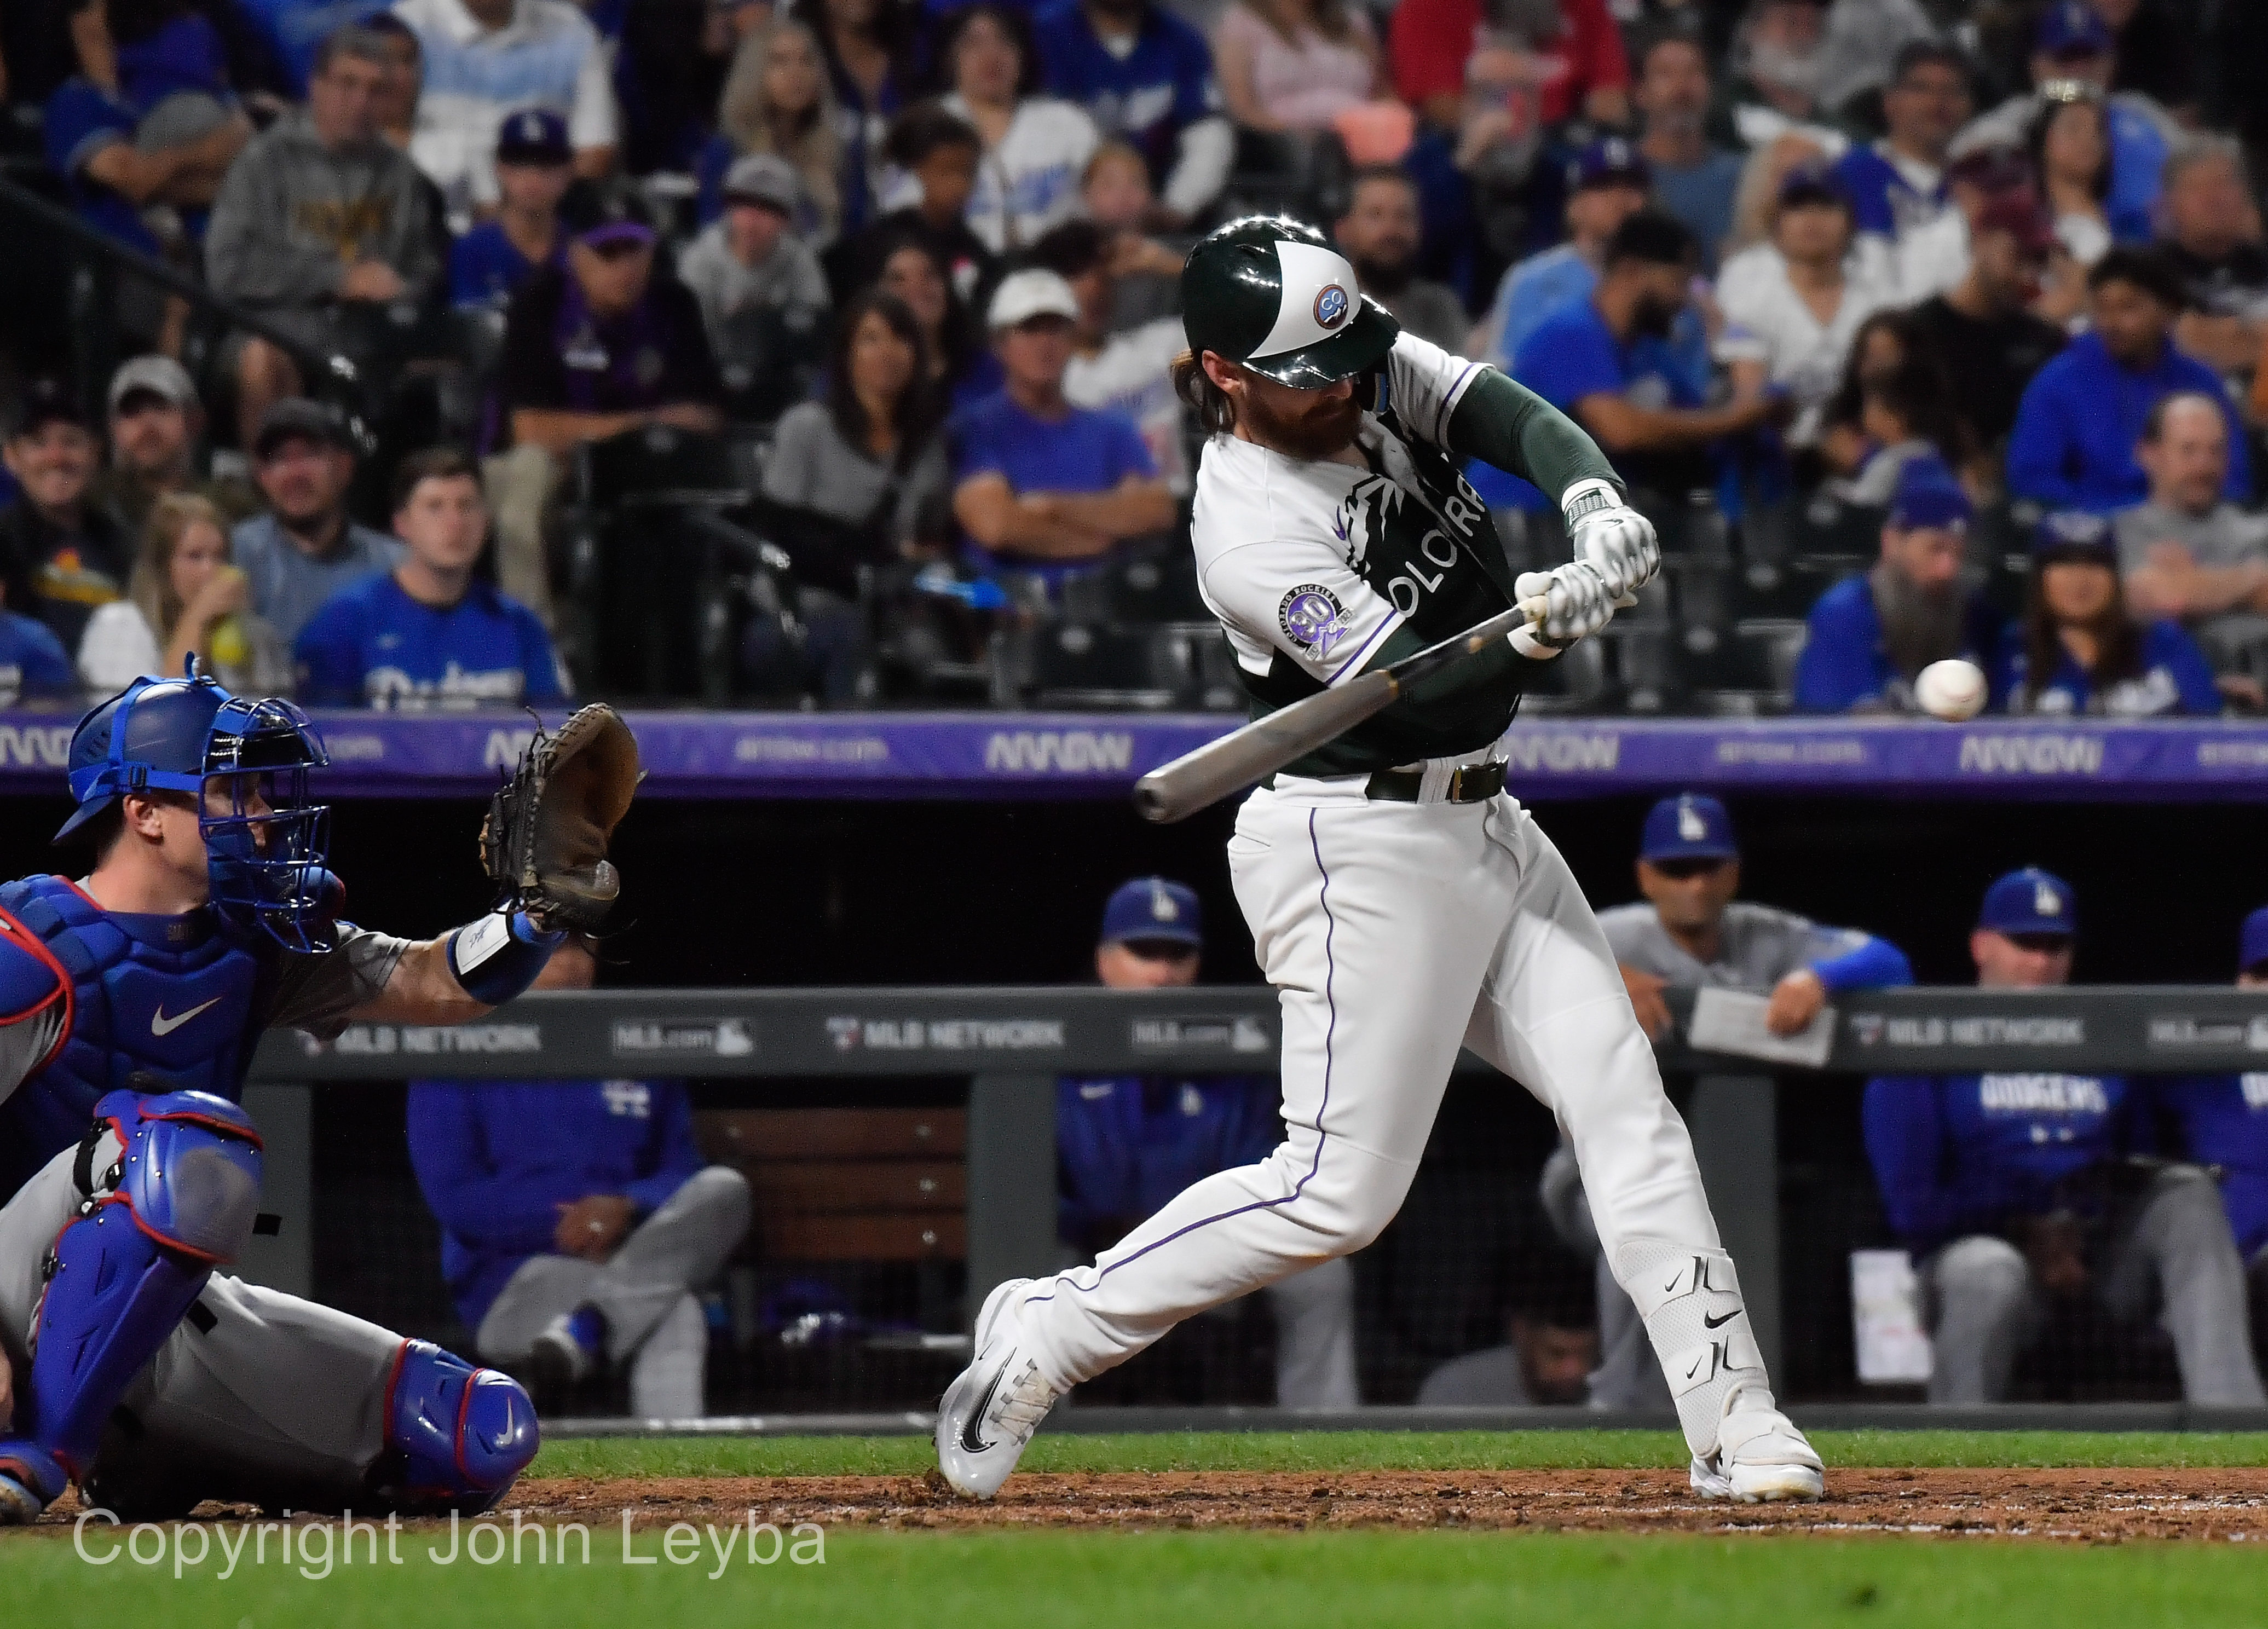 James Outman's offense blasts Dodgers past Rockies